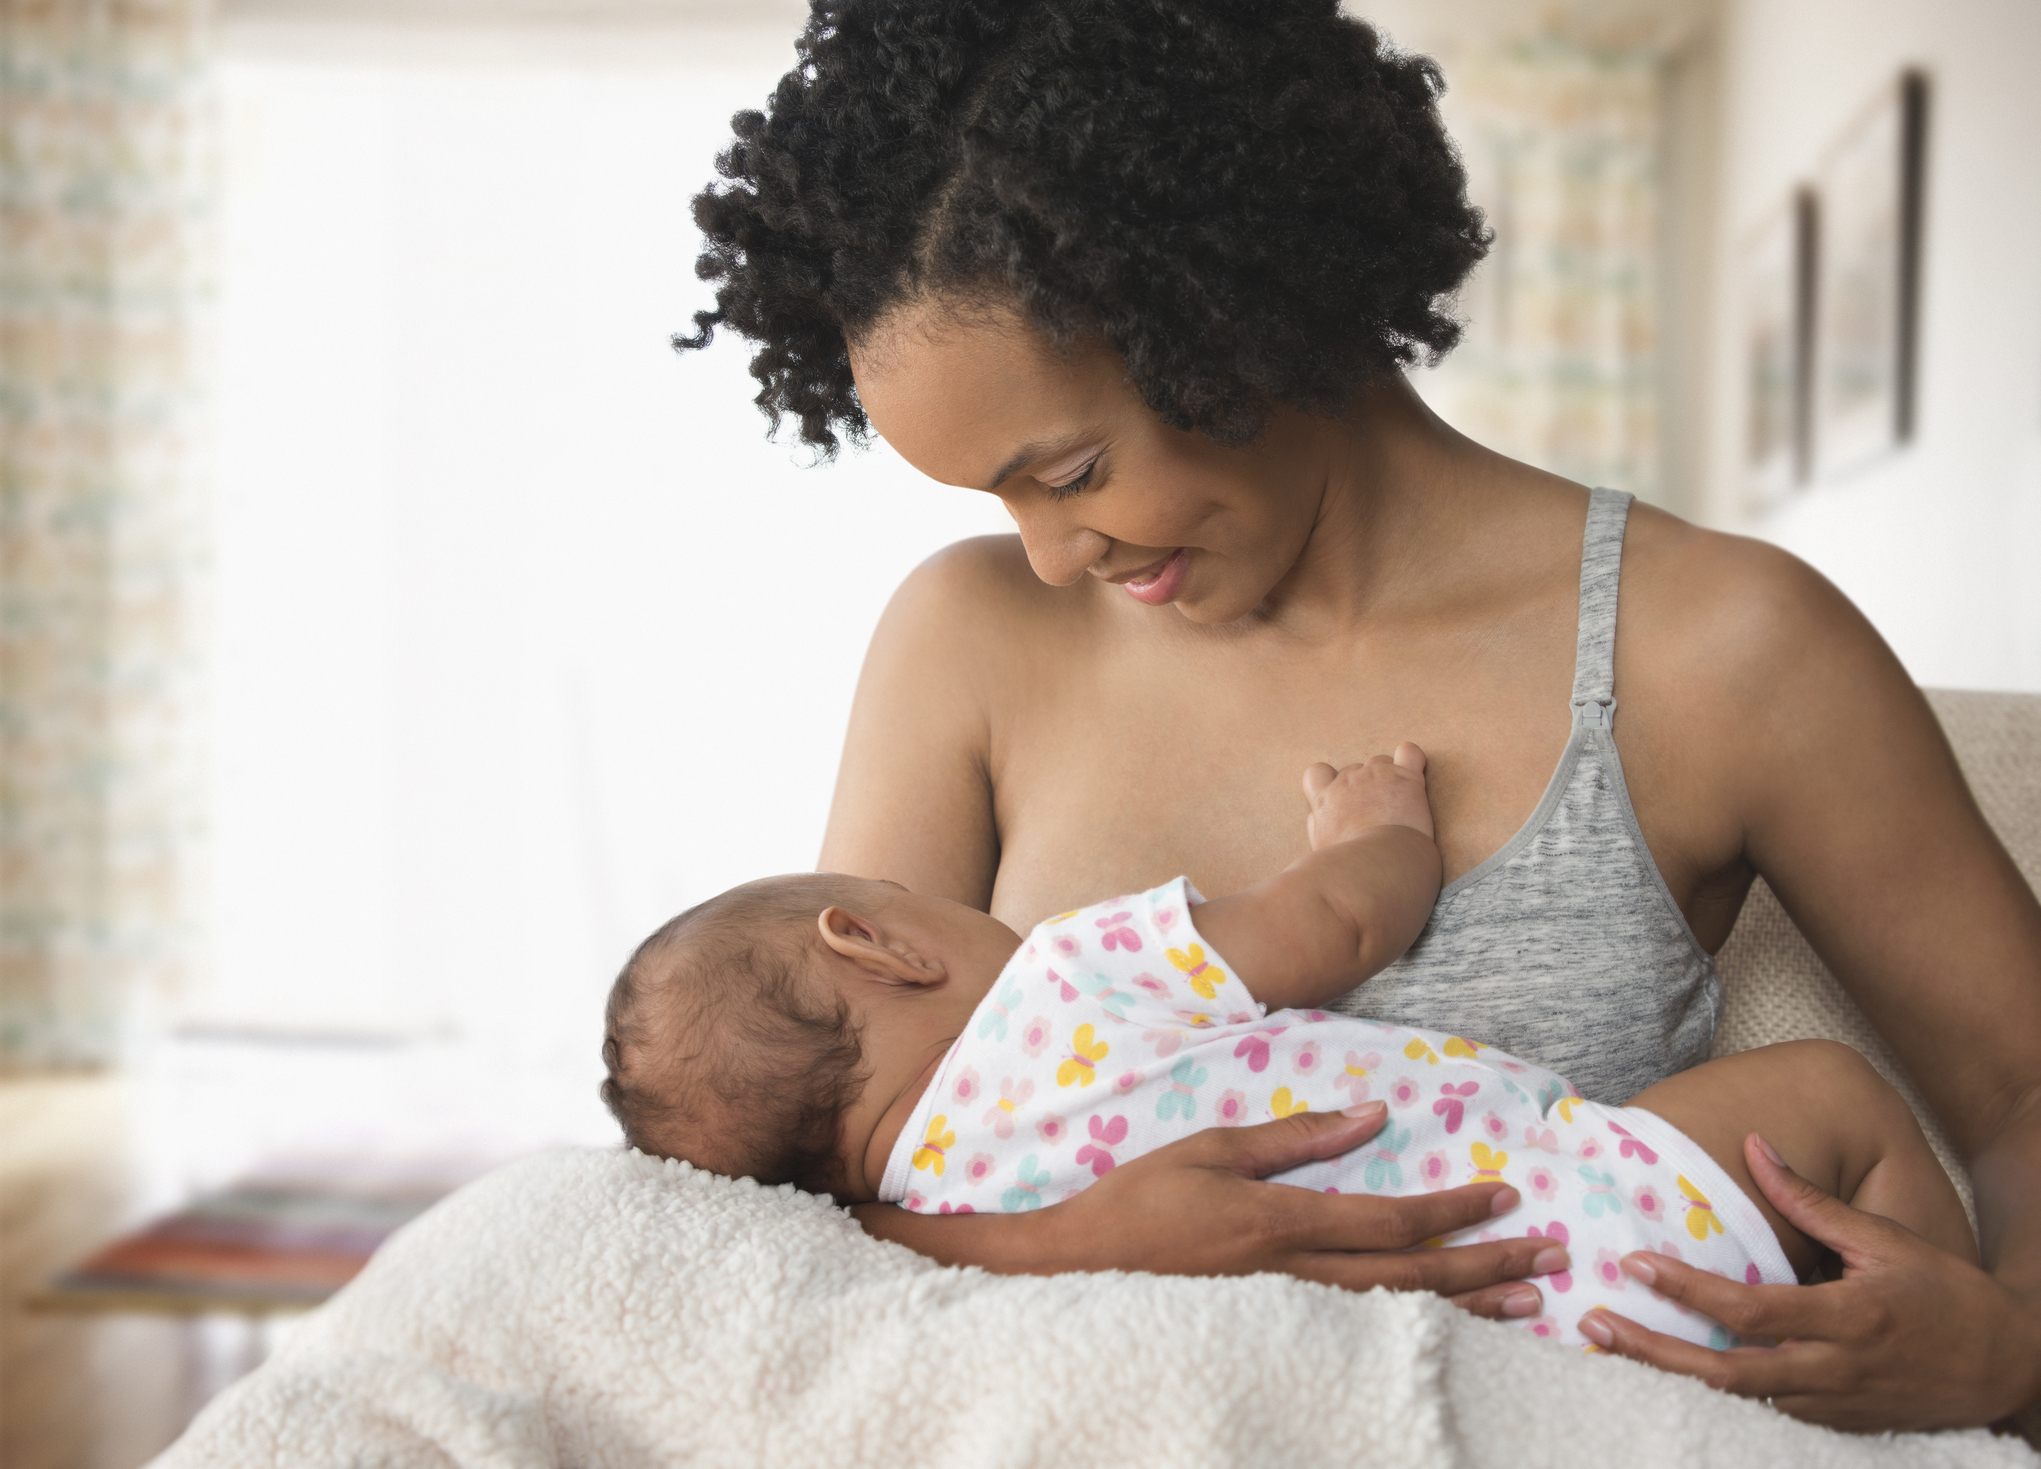 Does Breastfeeding Make Your Baby Smarter? And Does It Matter?